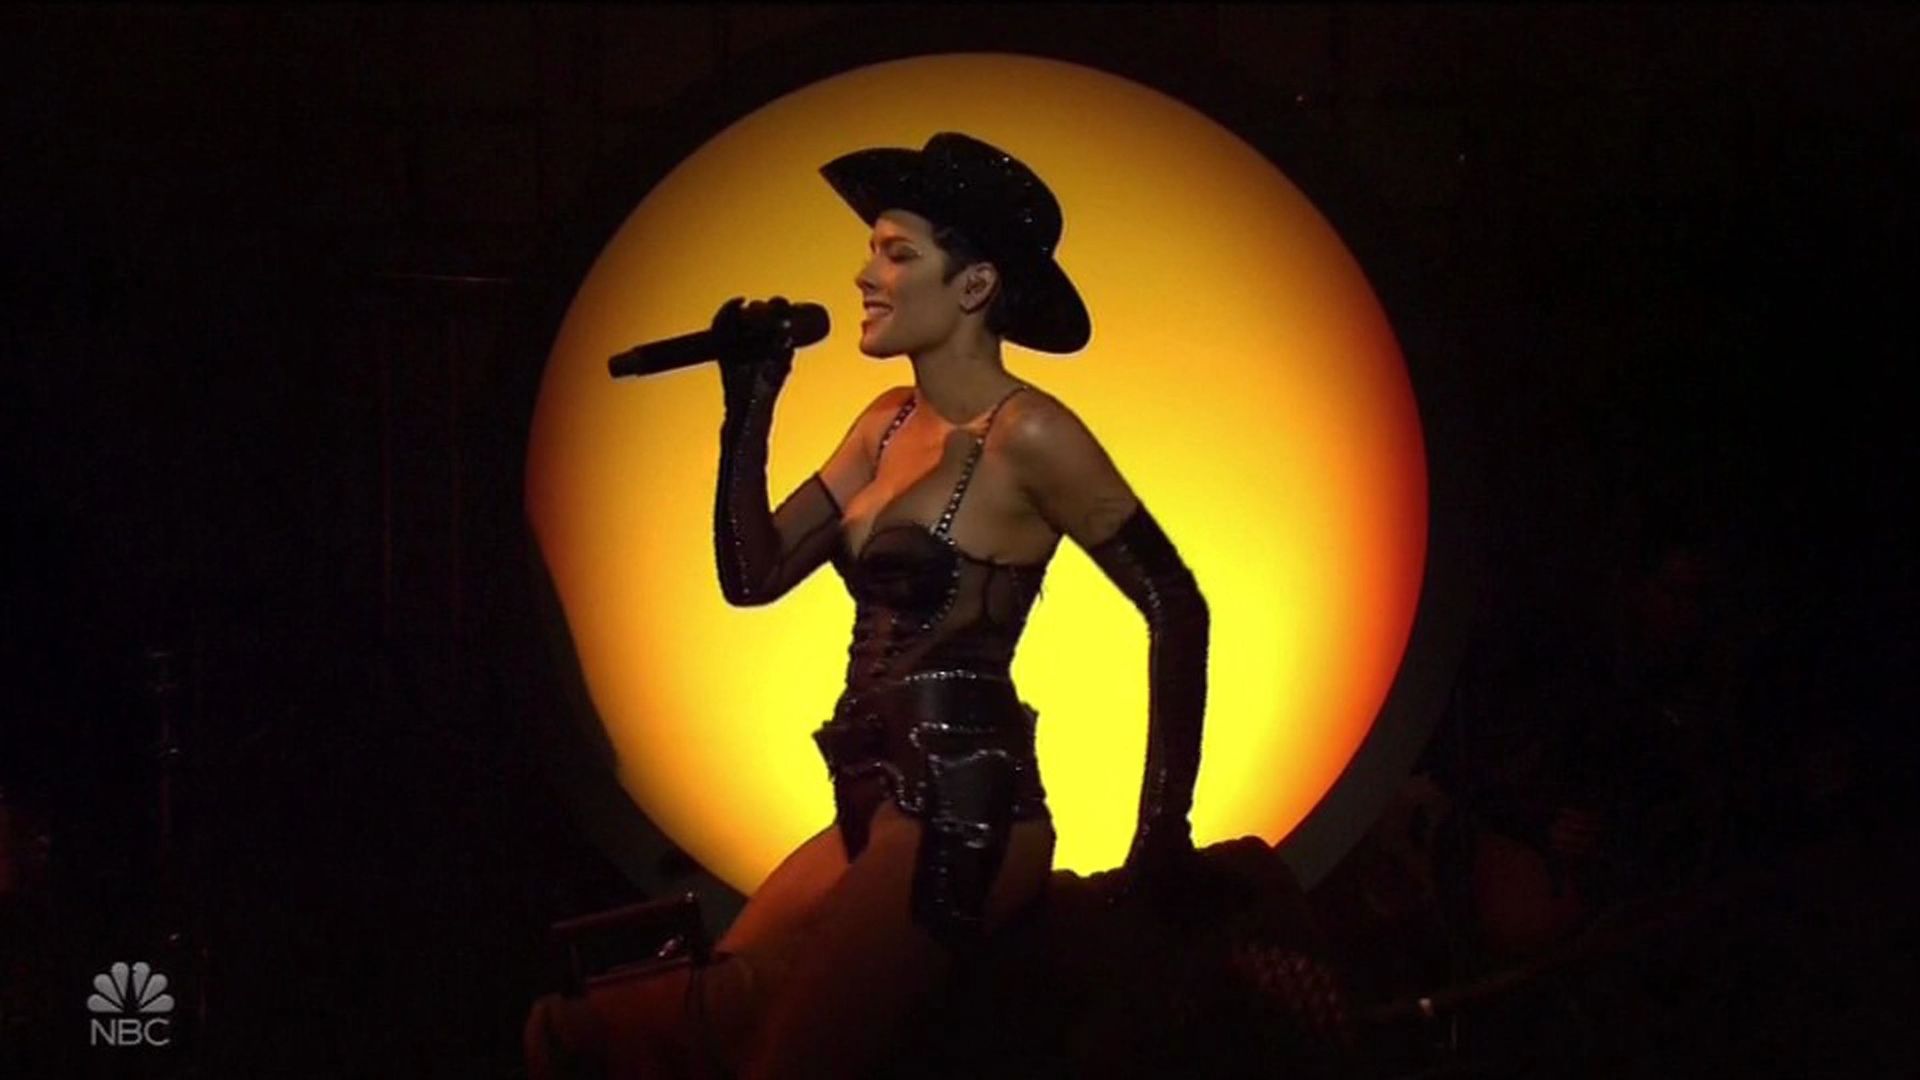 Halsey Steams Up The Screen As She Performs On Saturday Night Live 0004